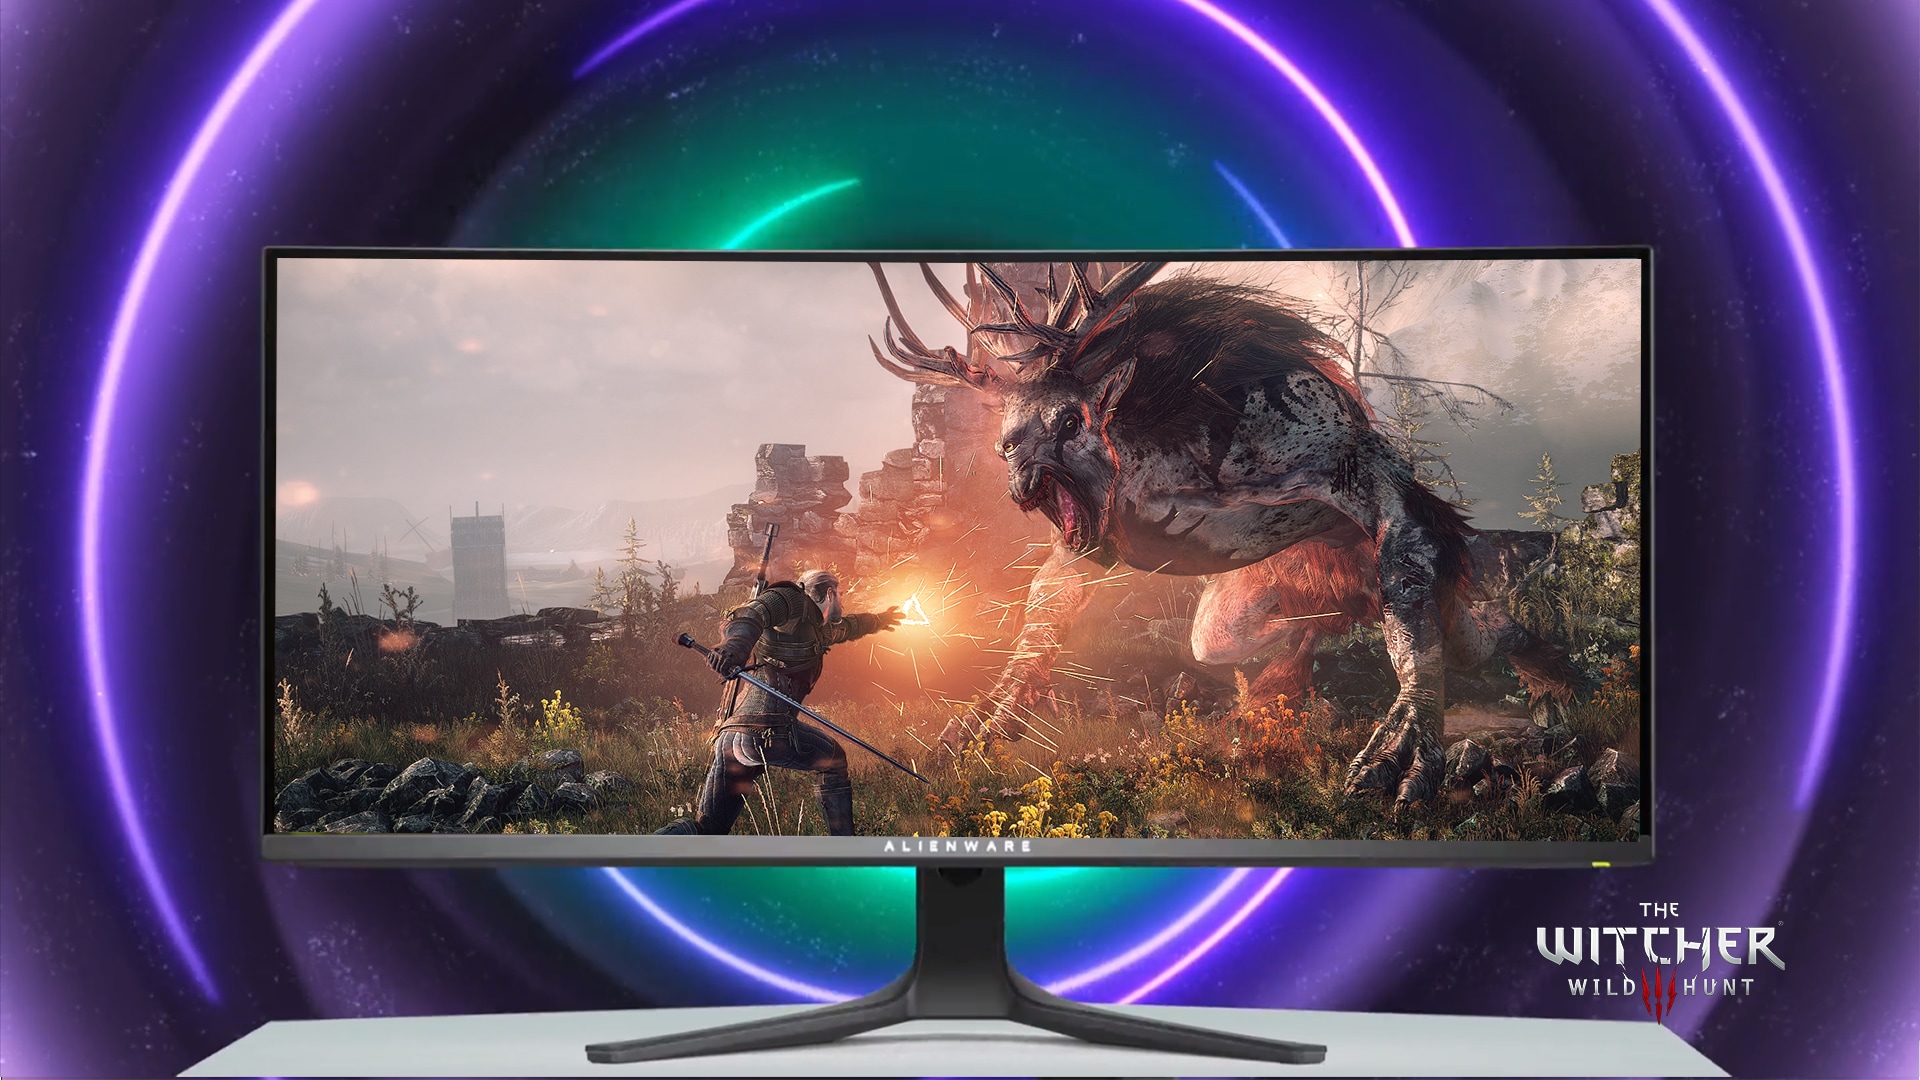 Alienware 34 Curve QD-OLED Gaming Monitor | Product Highlights